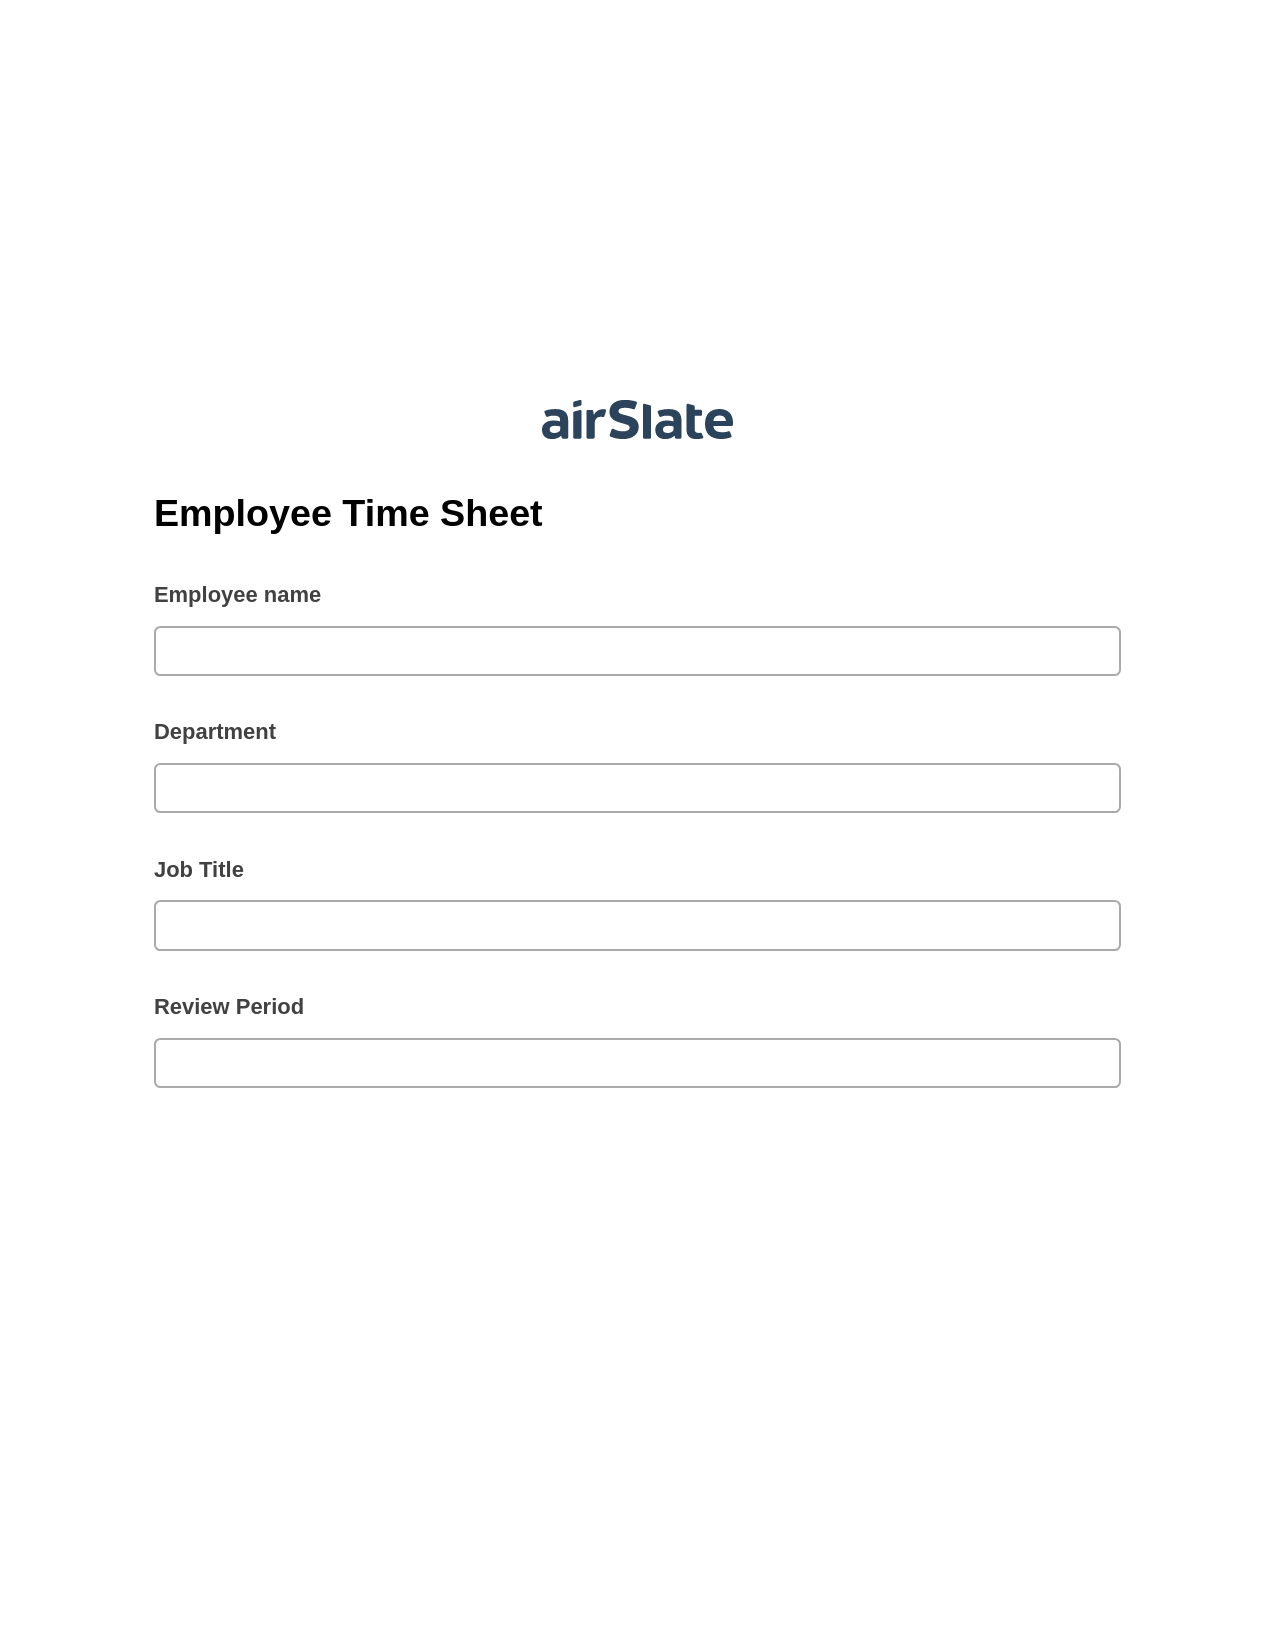 Employee Time Sheet Pre-fill Document Bot, Create Salesforce Records Bot, Archive to Google Drive Bot